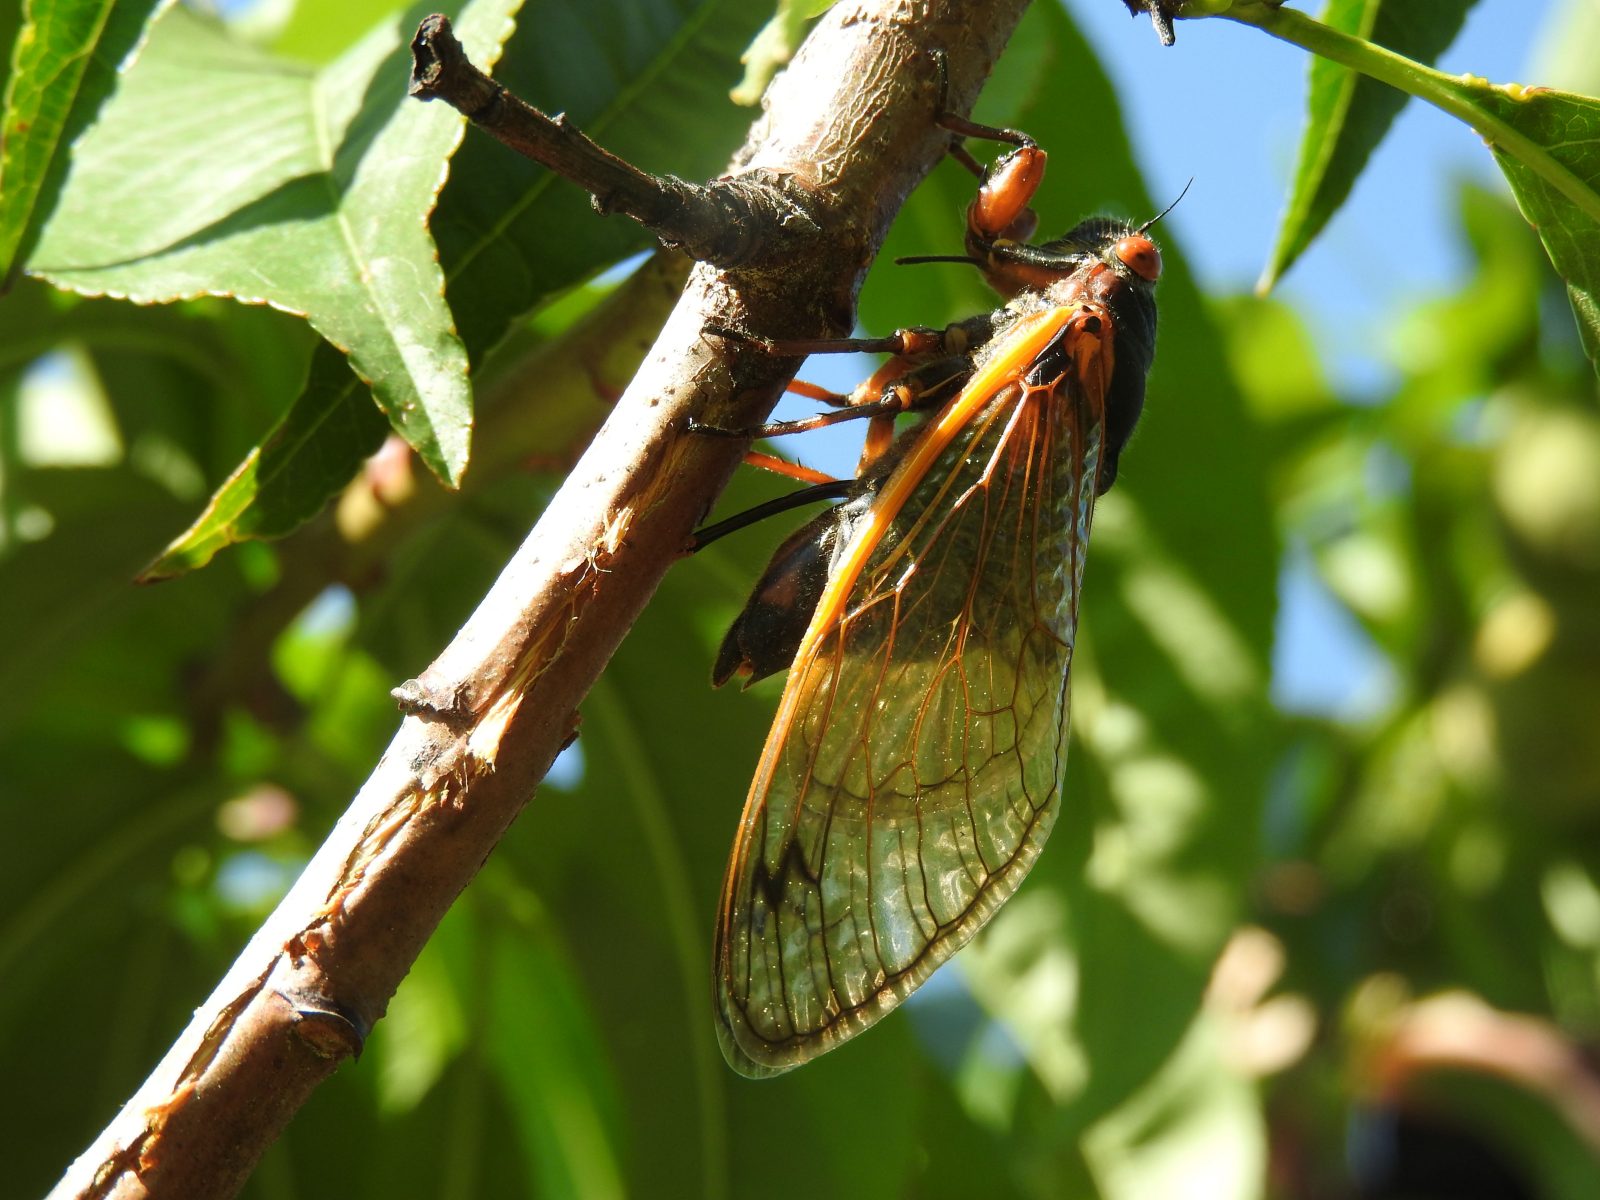 Newswise: Billions of cicadas are coming as two rare broods emerge, but not for everyone says expert